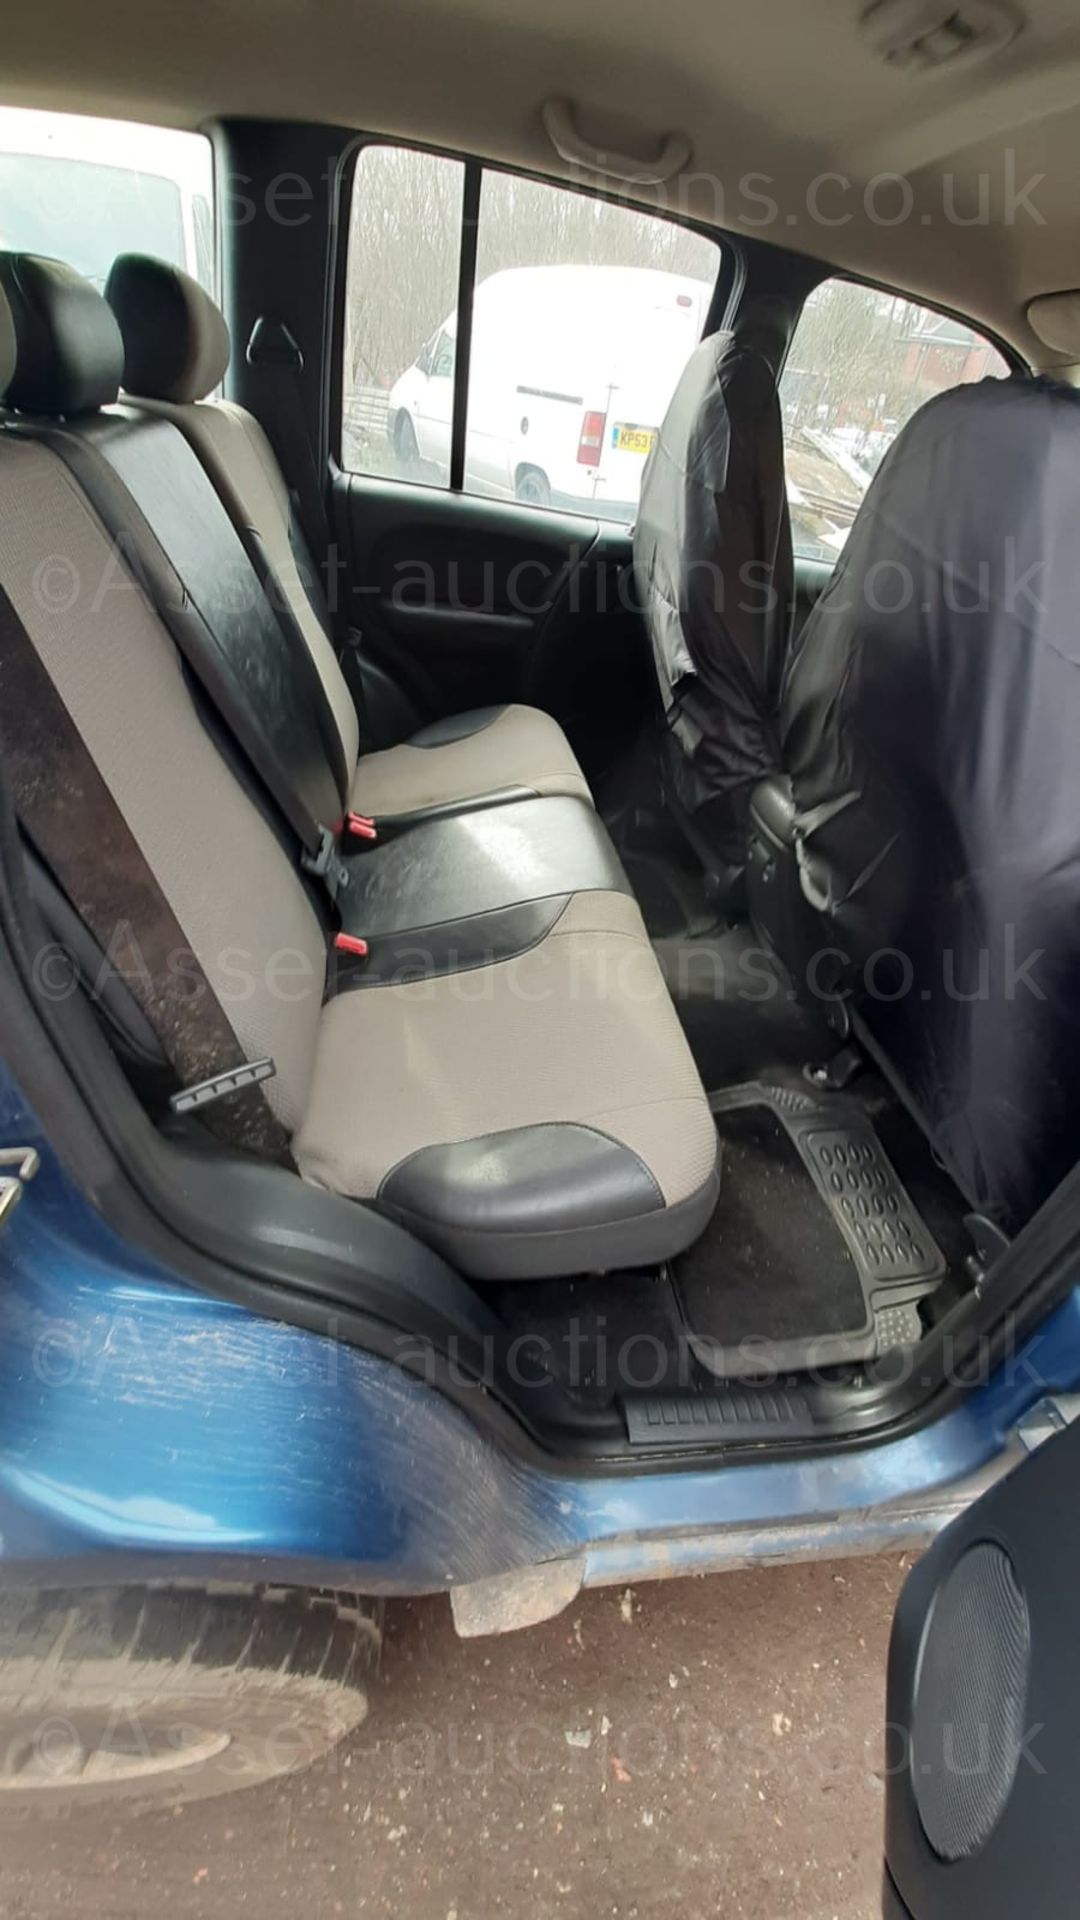 2004 JEEP CHEROKEE EXTREME SPORT A BLUE ESTATE, SHOWING 139,091 MILES, AUTO 4 GEARS *NO VAT* - Image 8 of 11